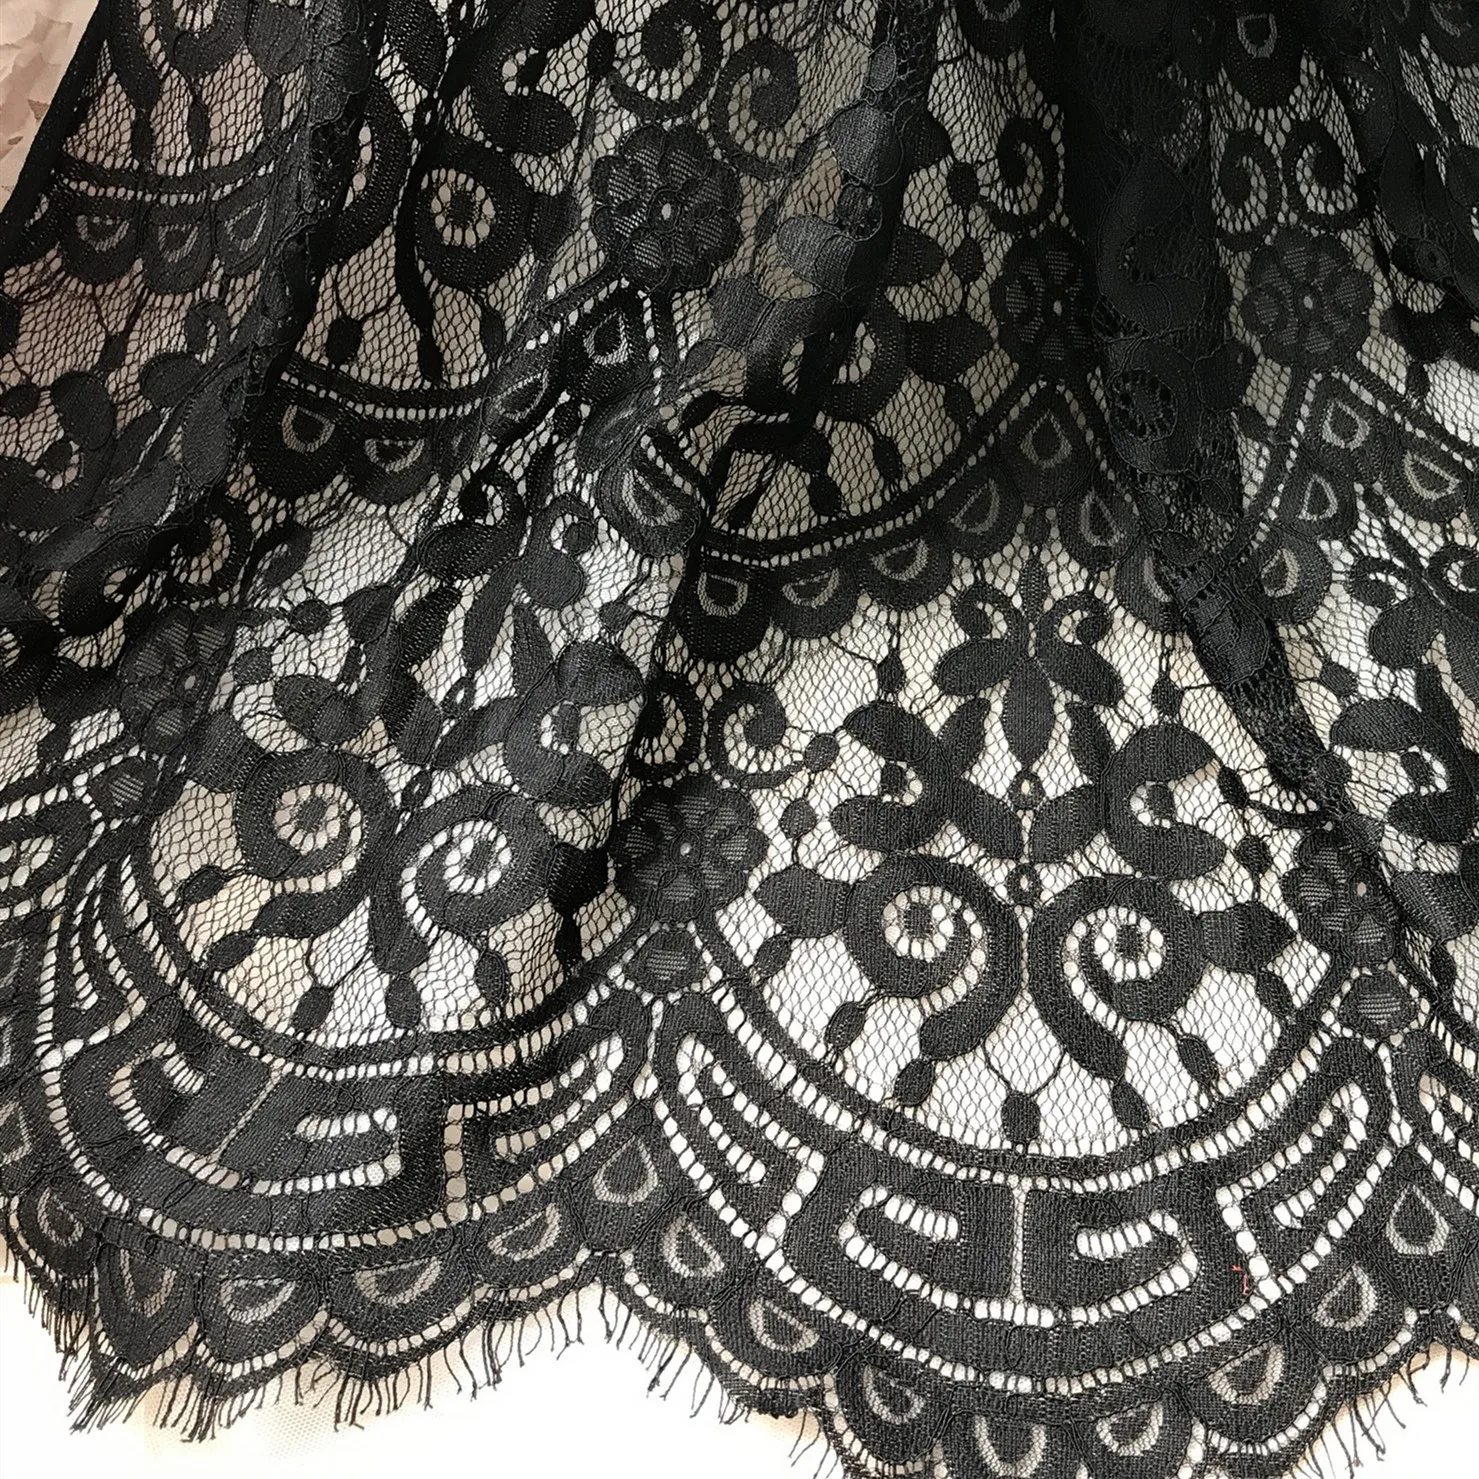 

Exquisite French Eyelash Lace Fabric Black Chantilly Lace Fabric Diy Curtain Decorative 150CM Width Clothes Accessories 3Meters